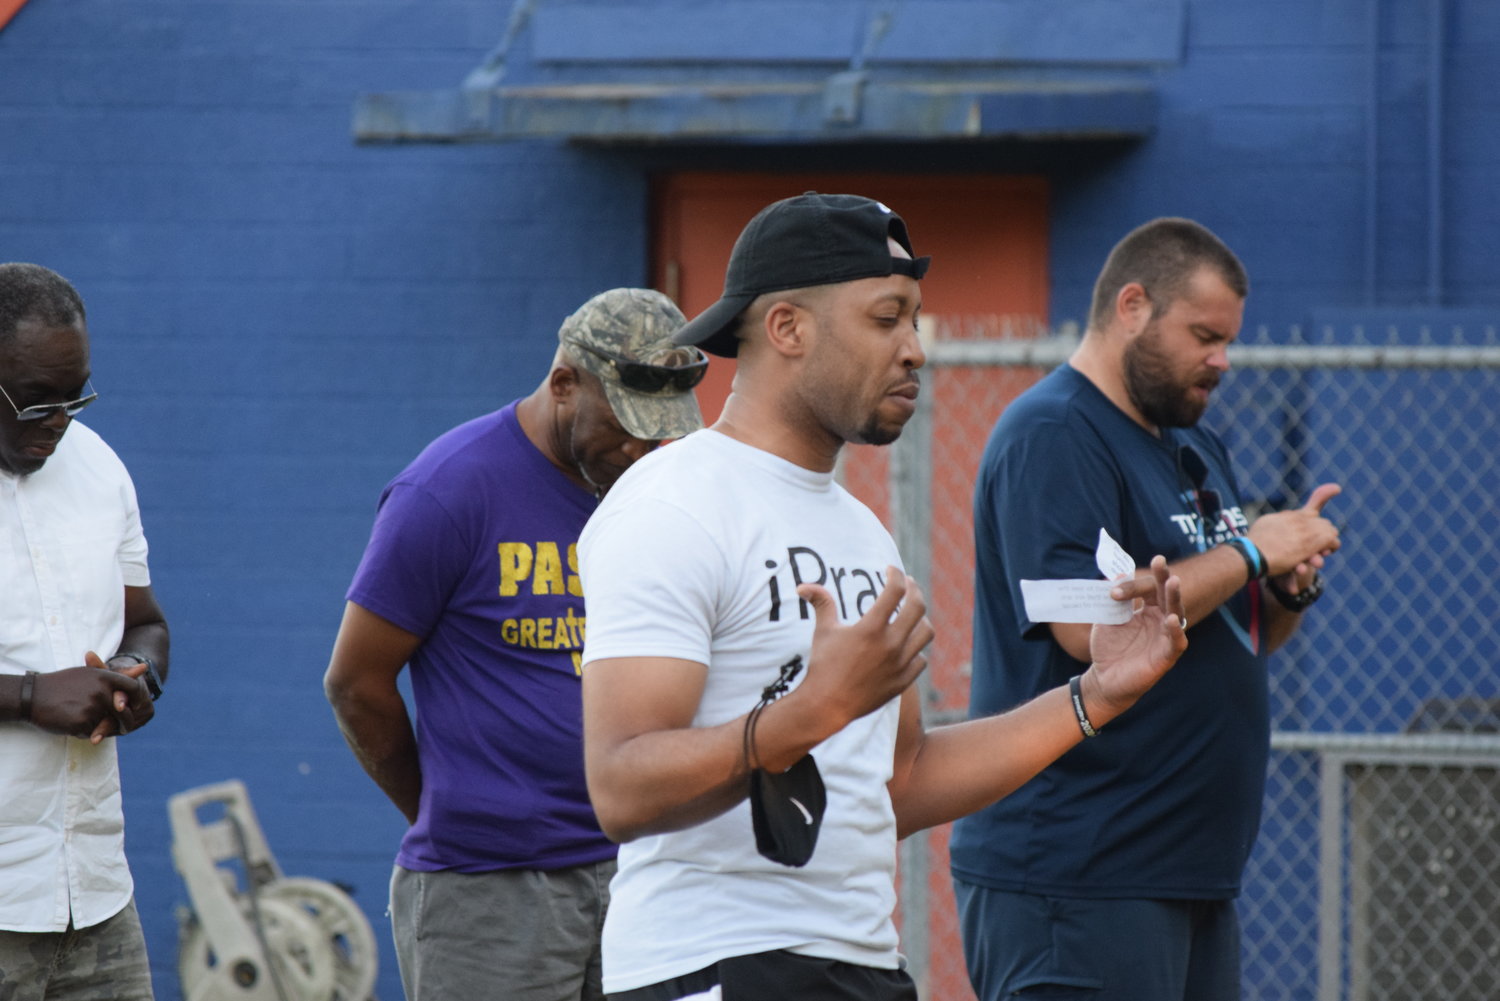 A Brookshire area resident gives a prayer at the praytest event. People of several racial and cultural backgrounds joined in the event.